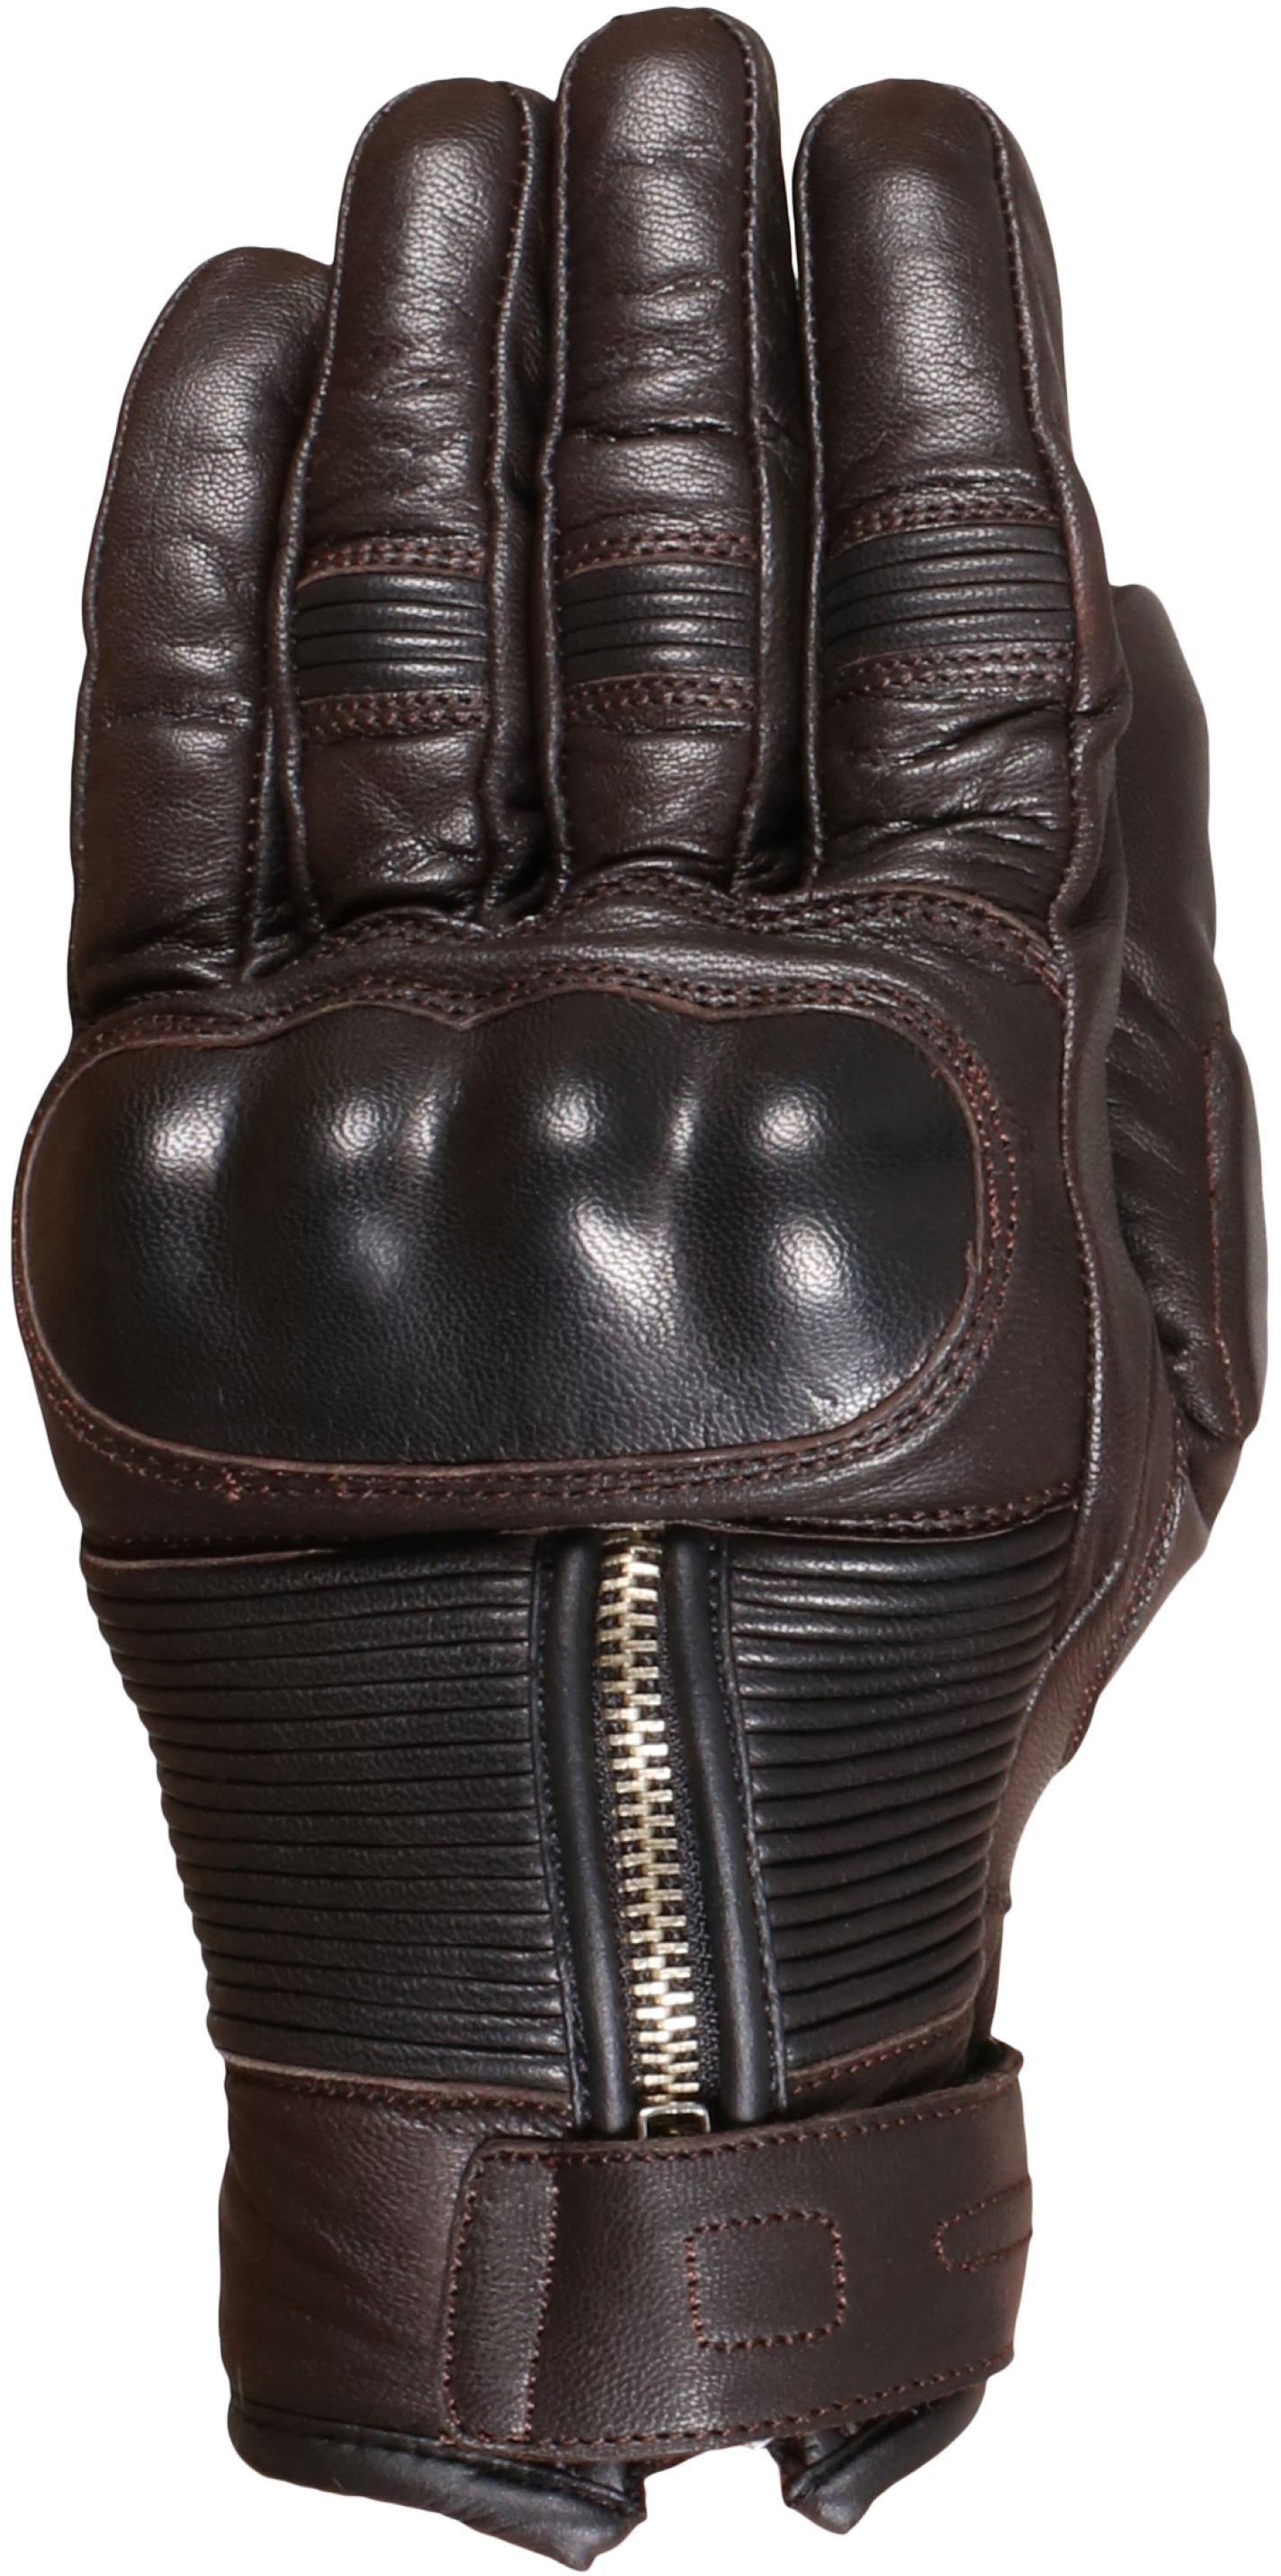 Weise Union Motorcycle Gloves - Brown, L